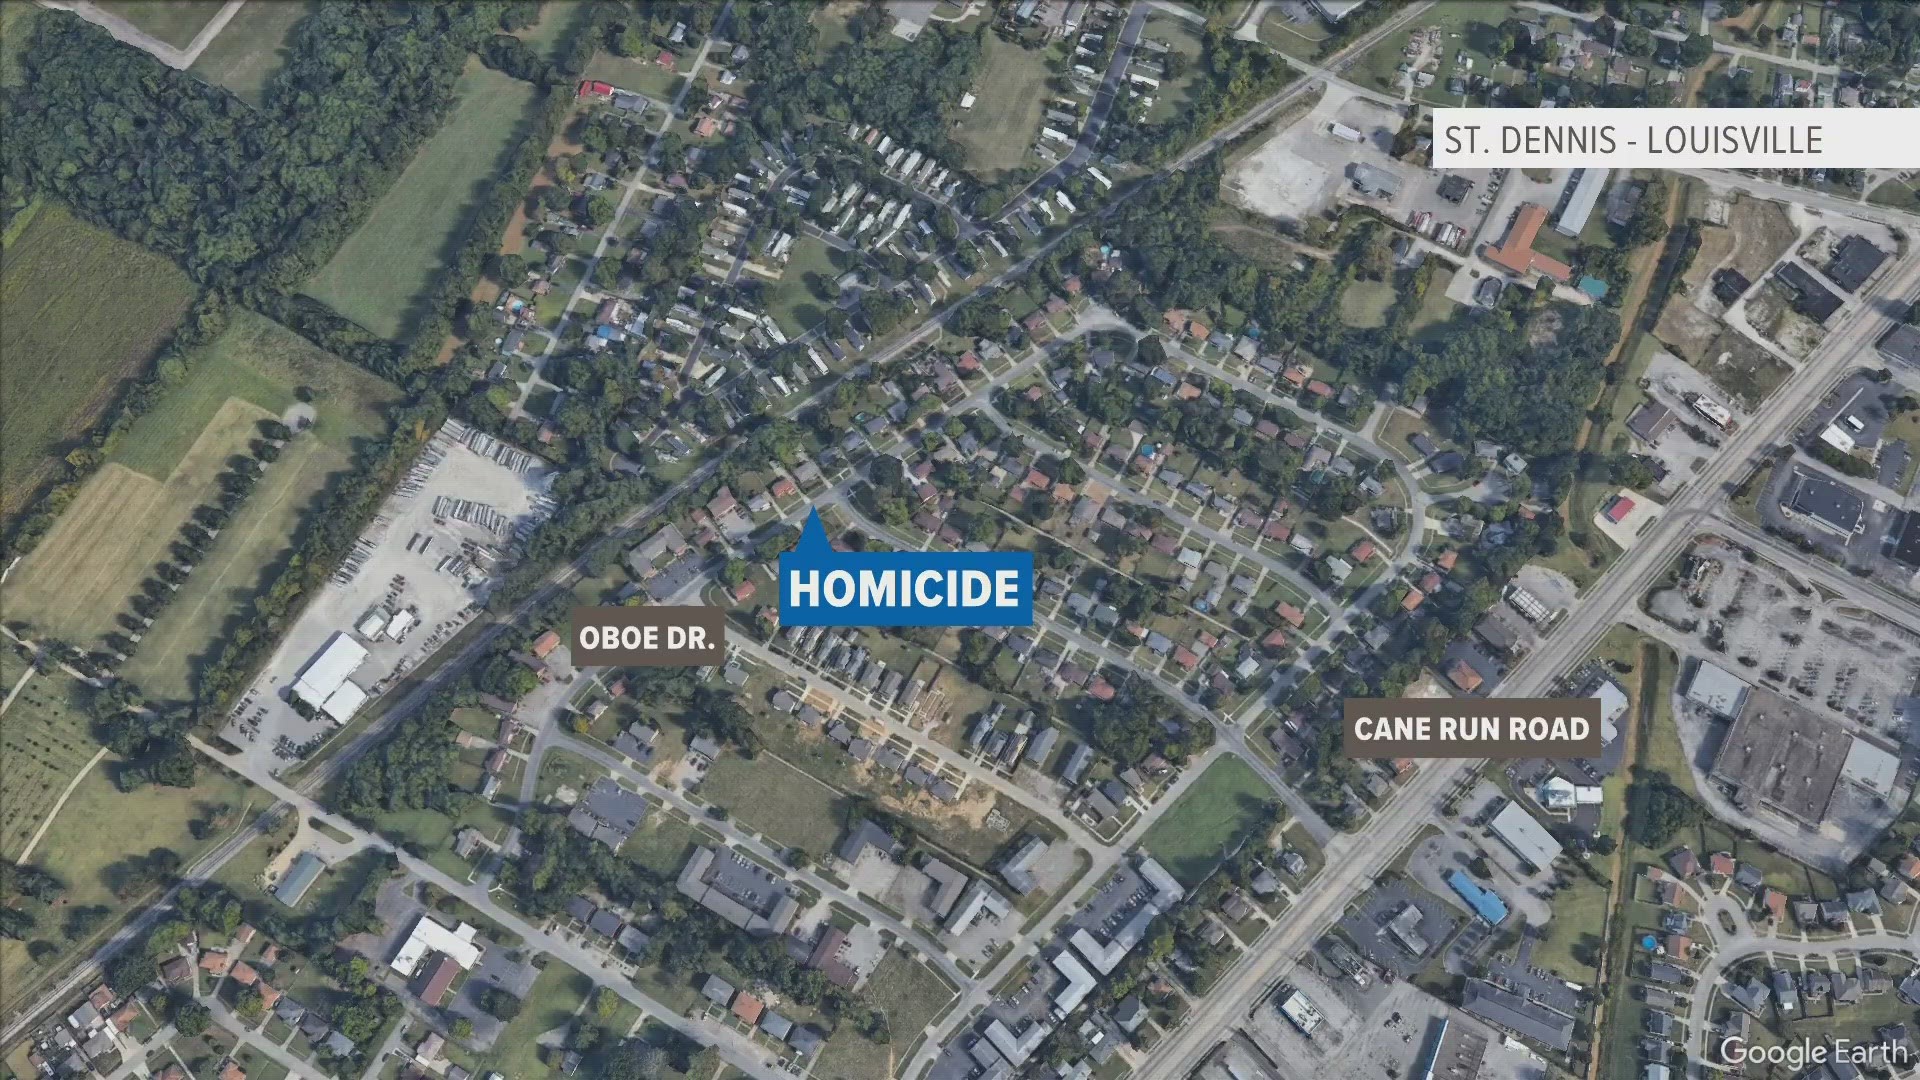 Police are searching for the person who killed a man in Louisville on Thursday night.